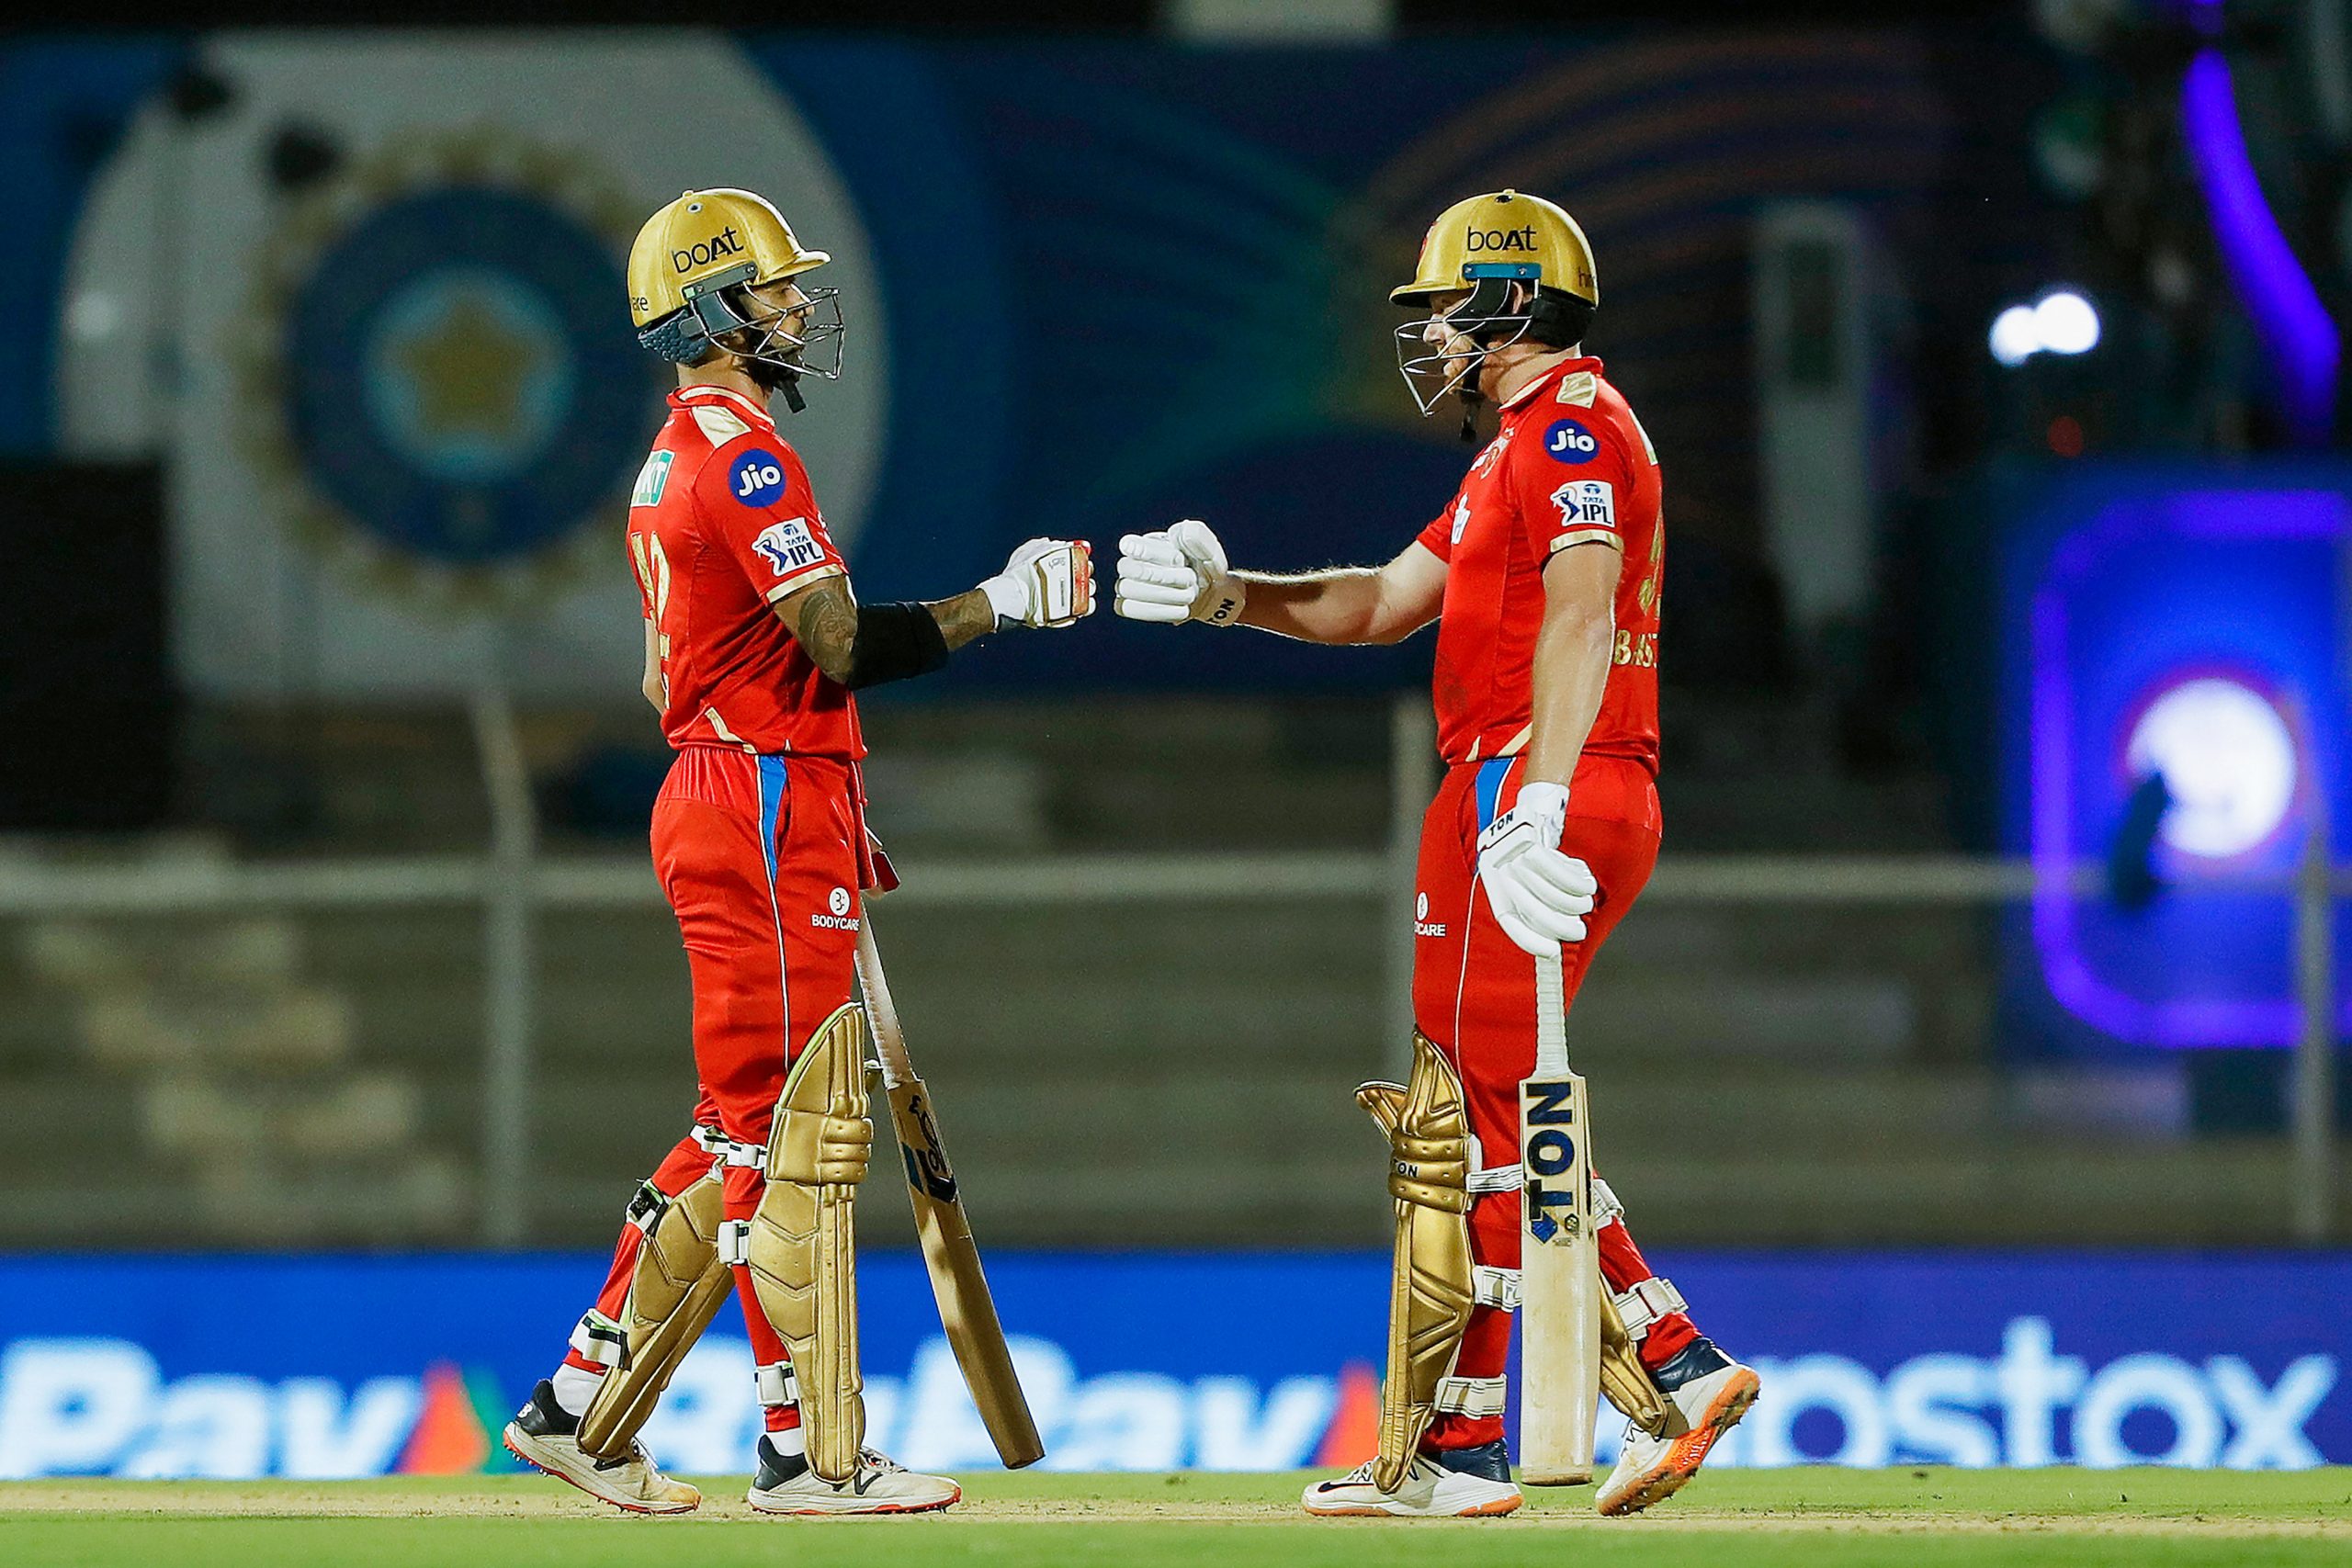 When and where to watch Punjab Kings vs Delhi Capitals live streaming and telecast?